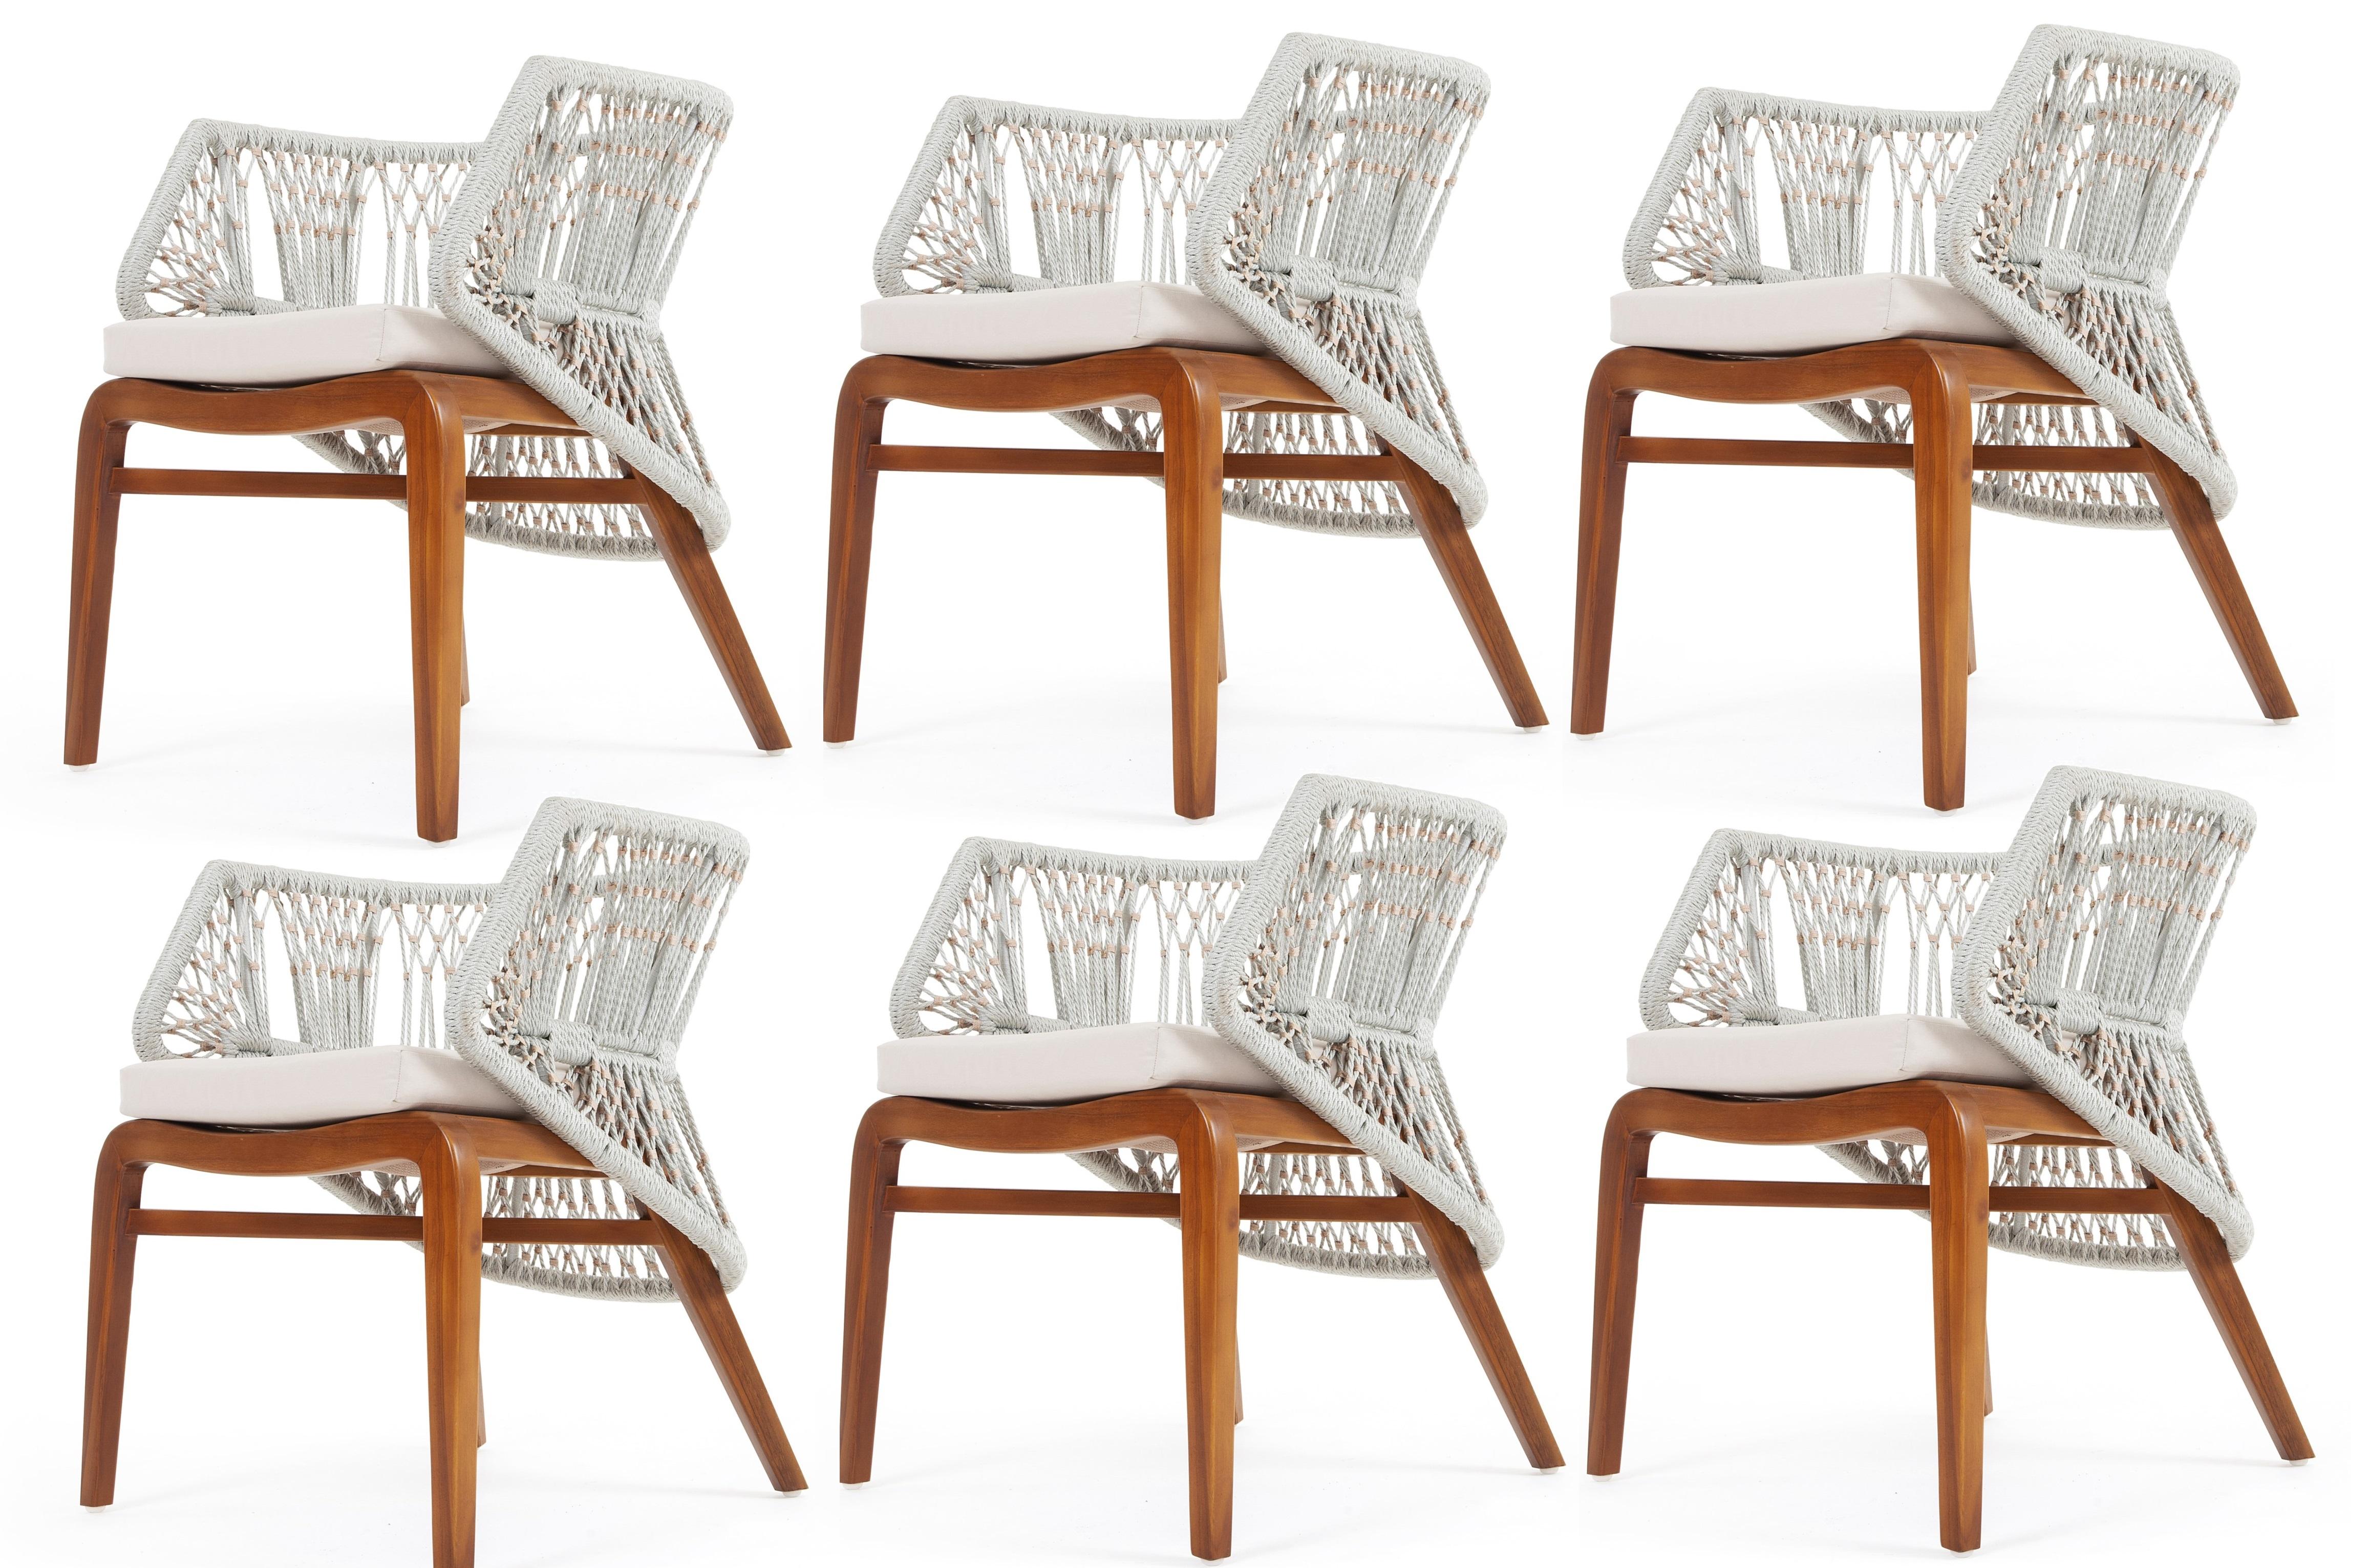 Handwoven Rope Outdoor Chairs In Solid Teak (Set Of 6) For Sale